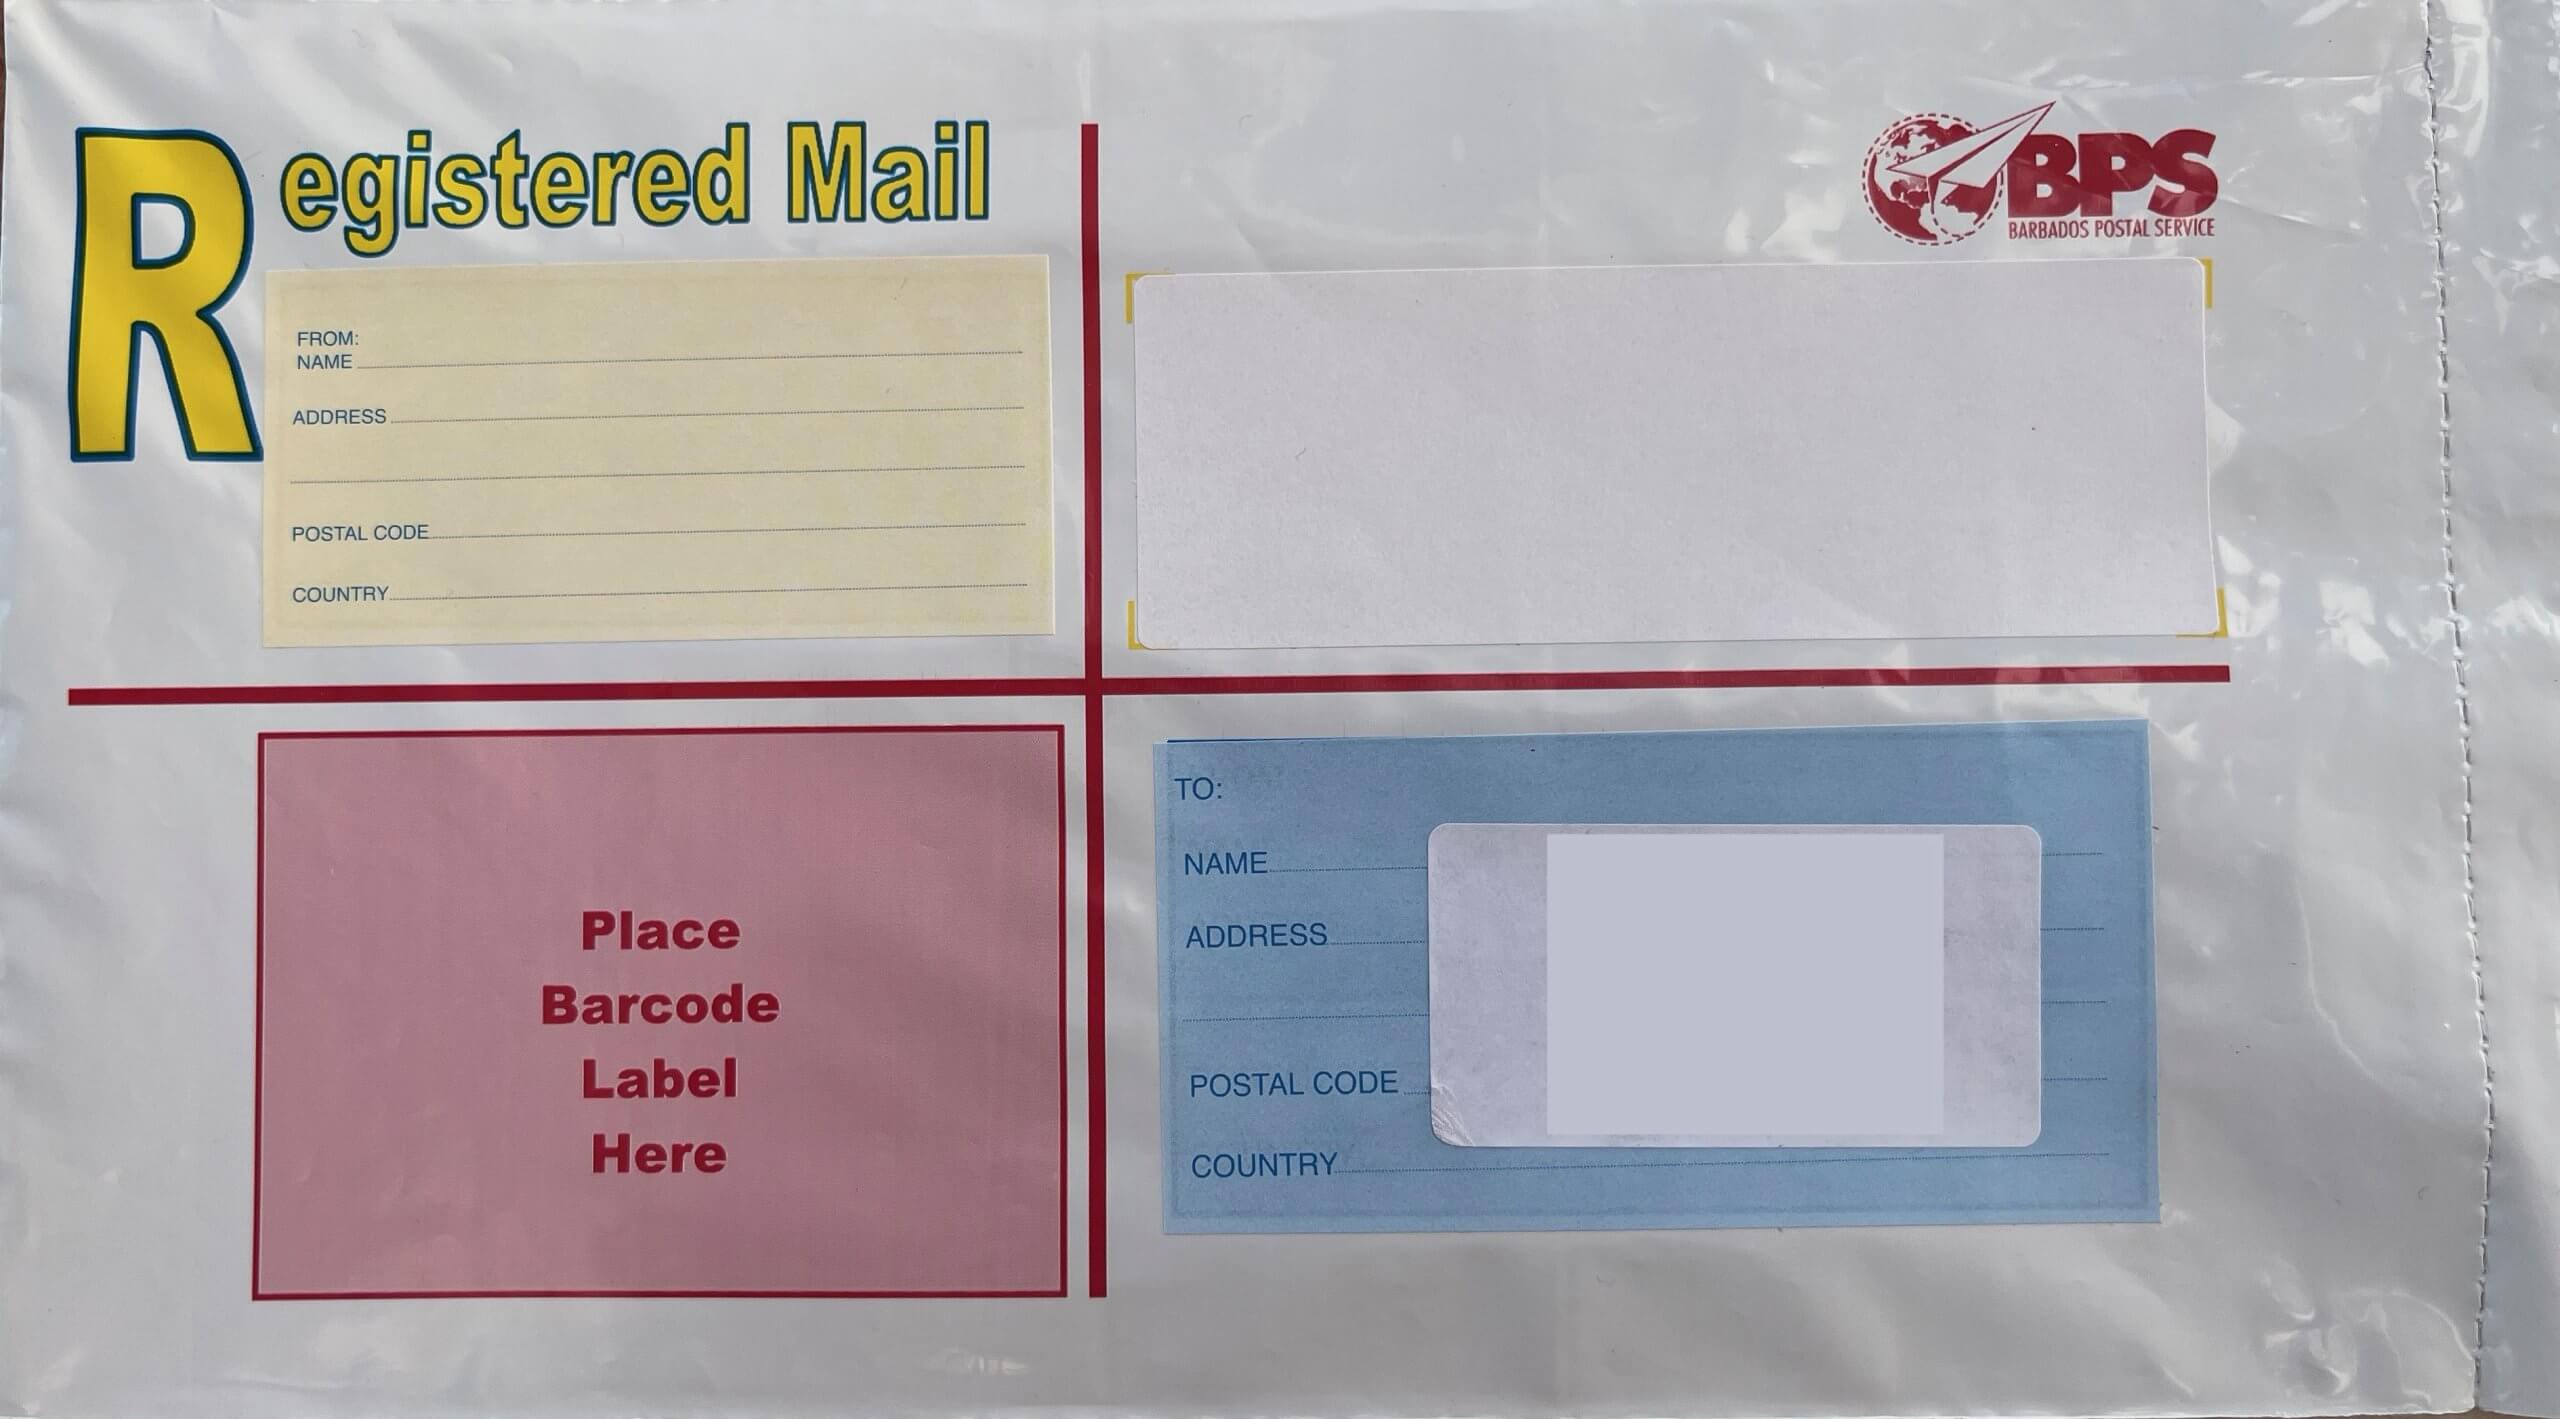 Type 2 - from in yellow top left as an adhesive label, from bottom right also as an adhesive label. Barcode area pink